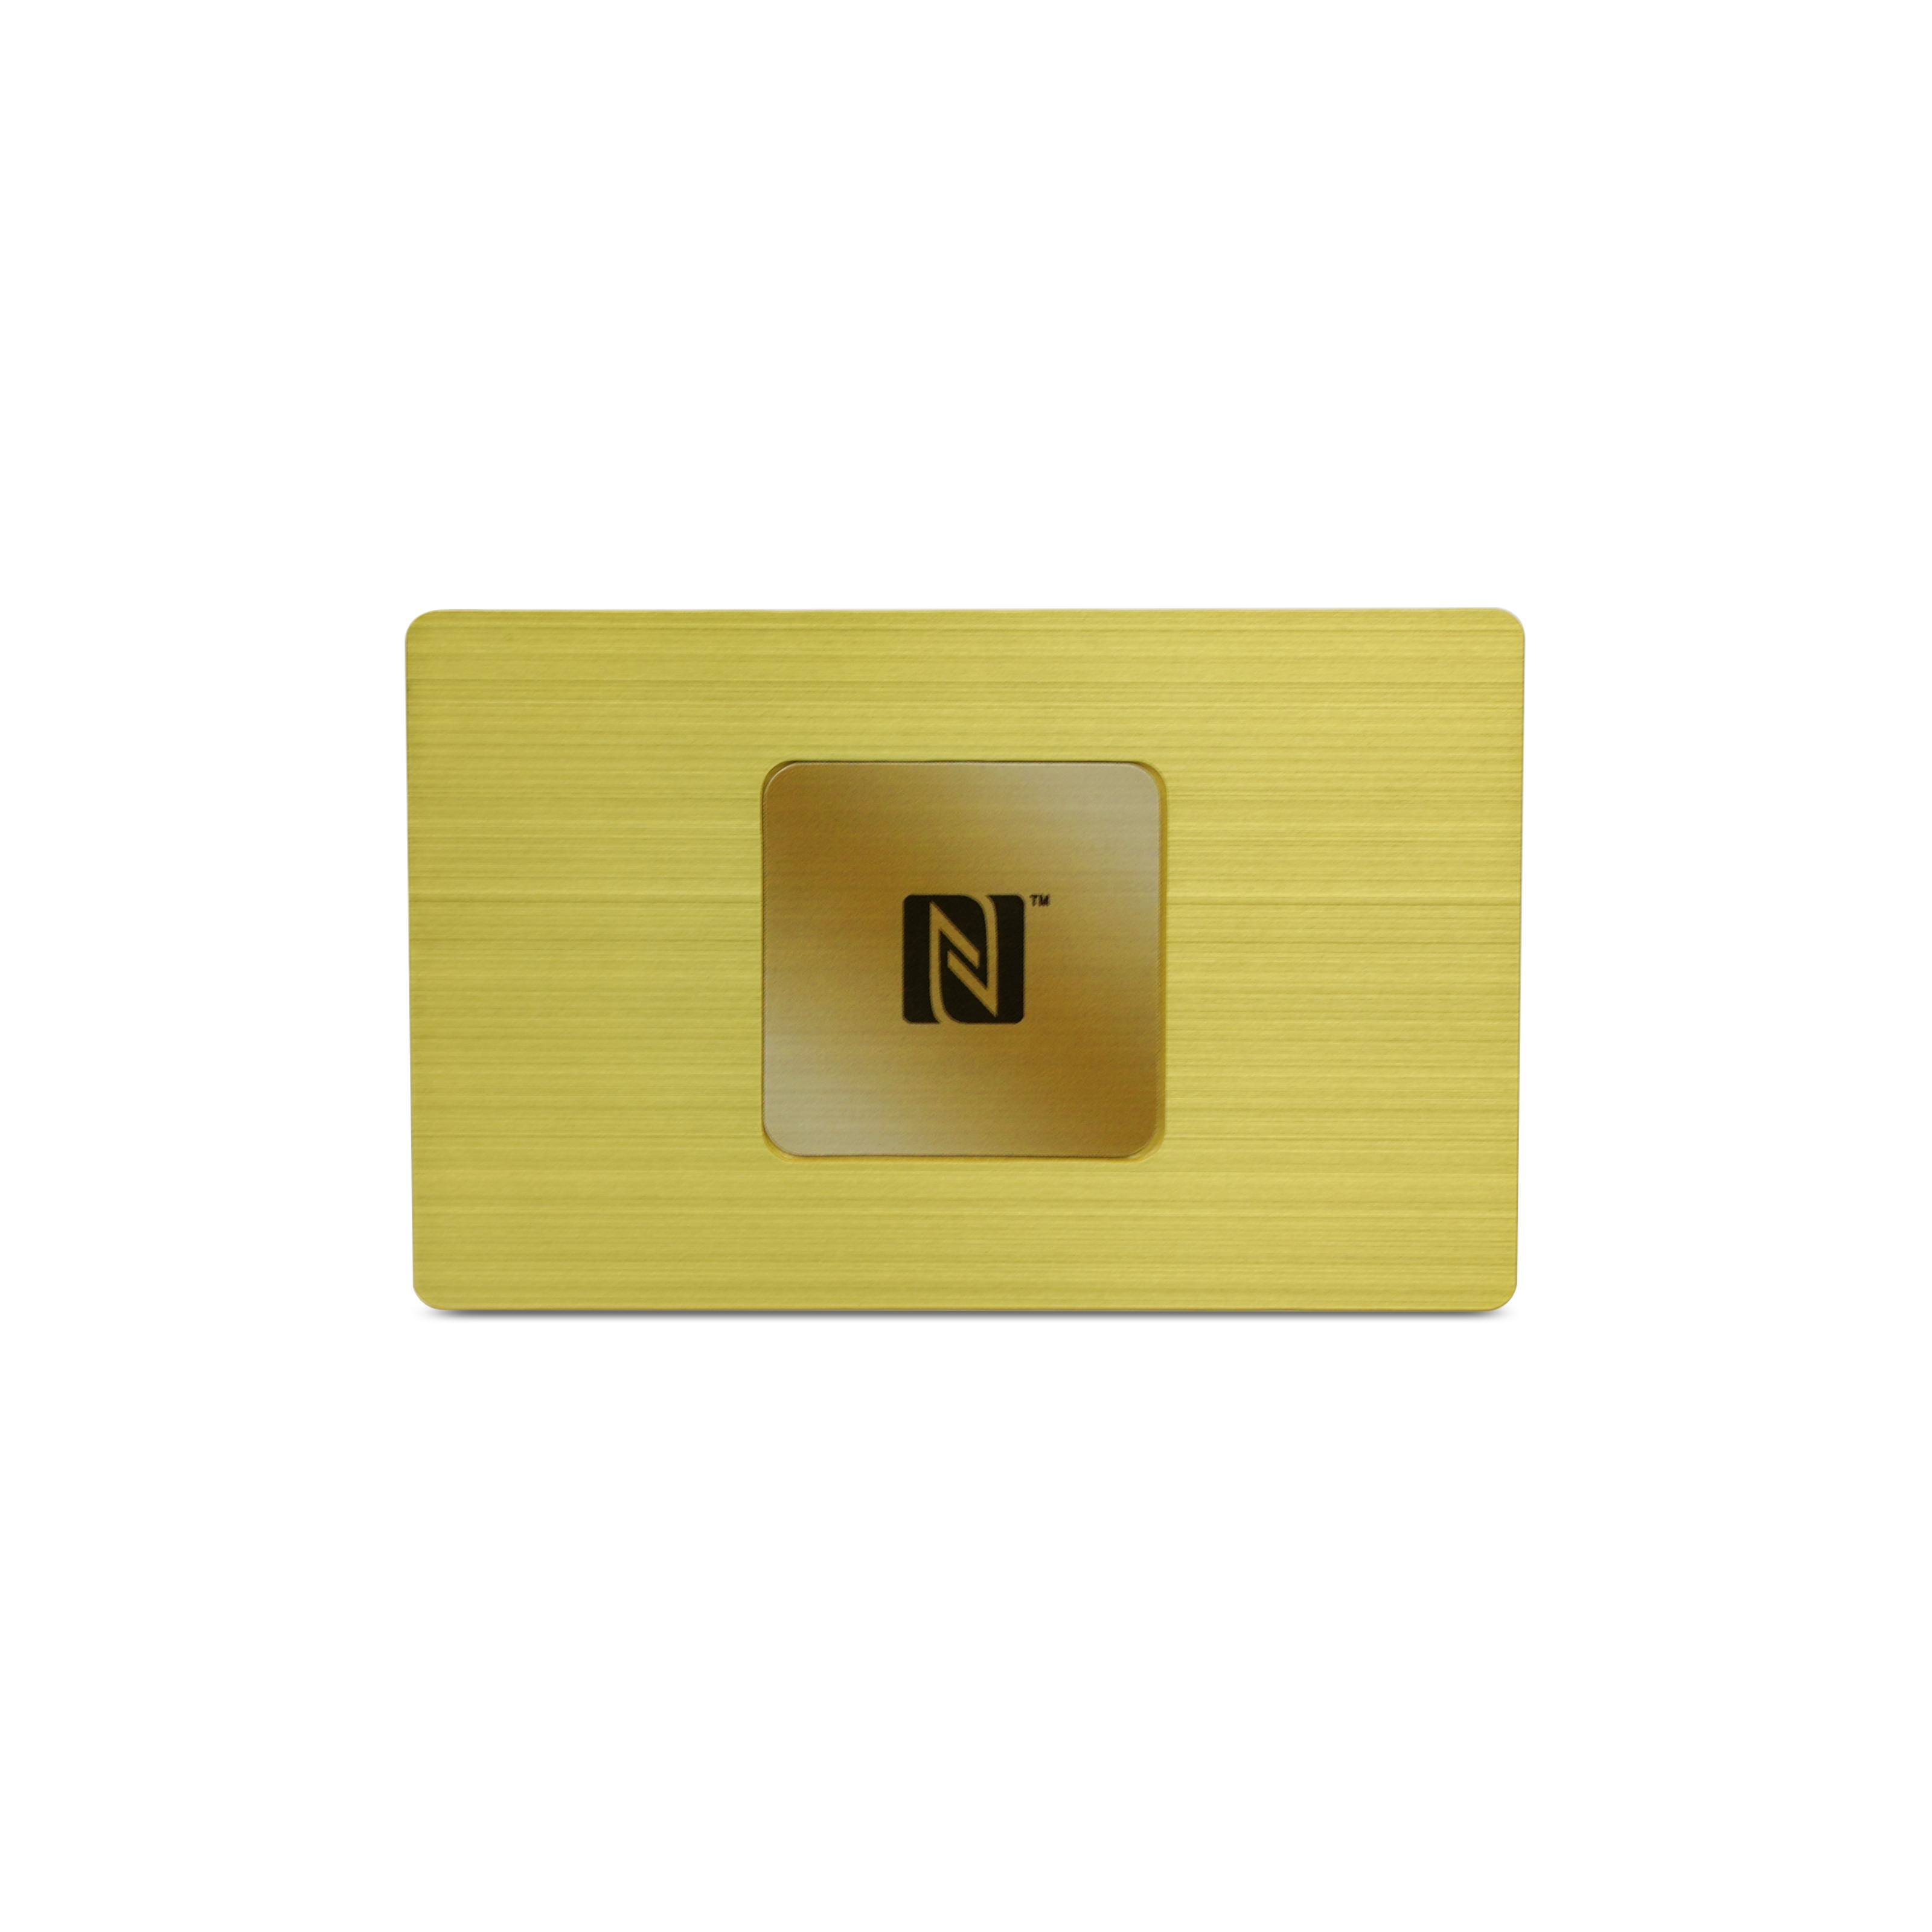 NFC-vCard - Digital business card - incl. NFC-vCard access - metal - 85.6 x 54 mm - gold with engraving